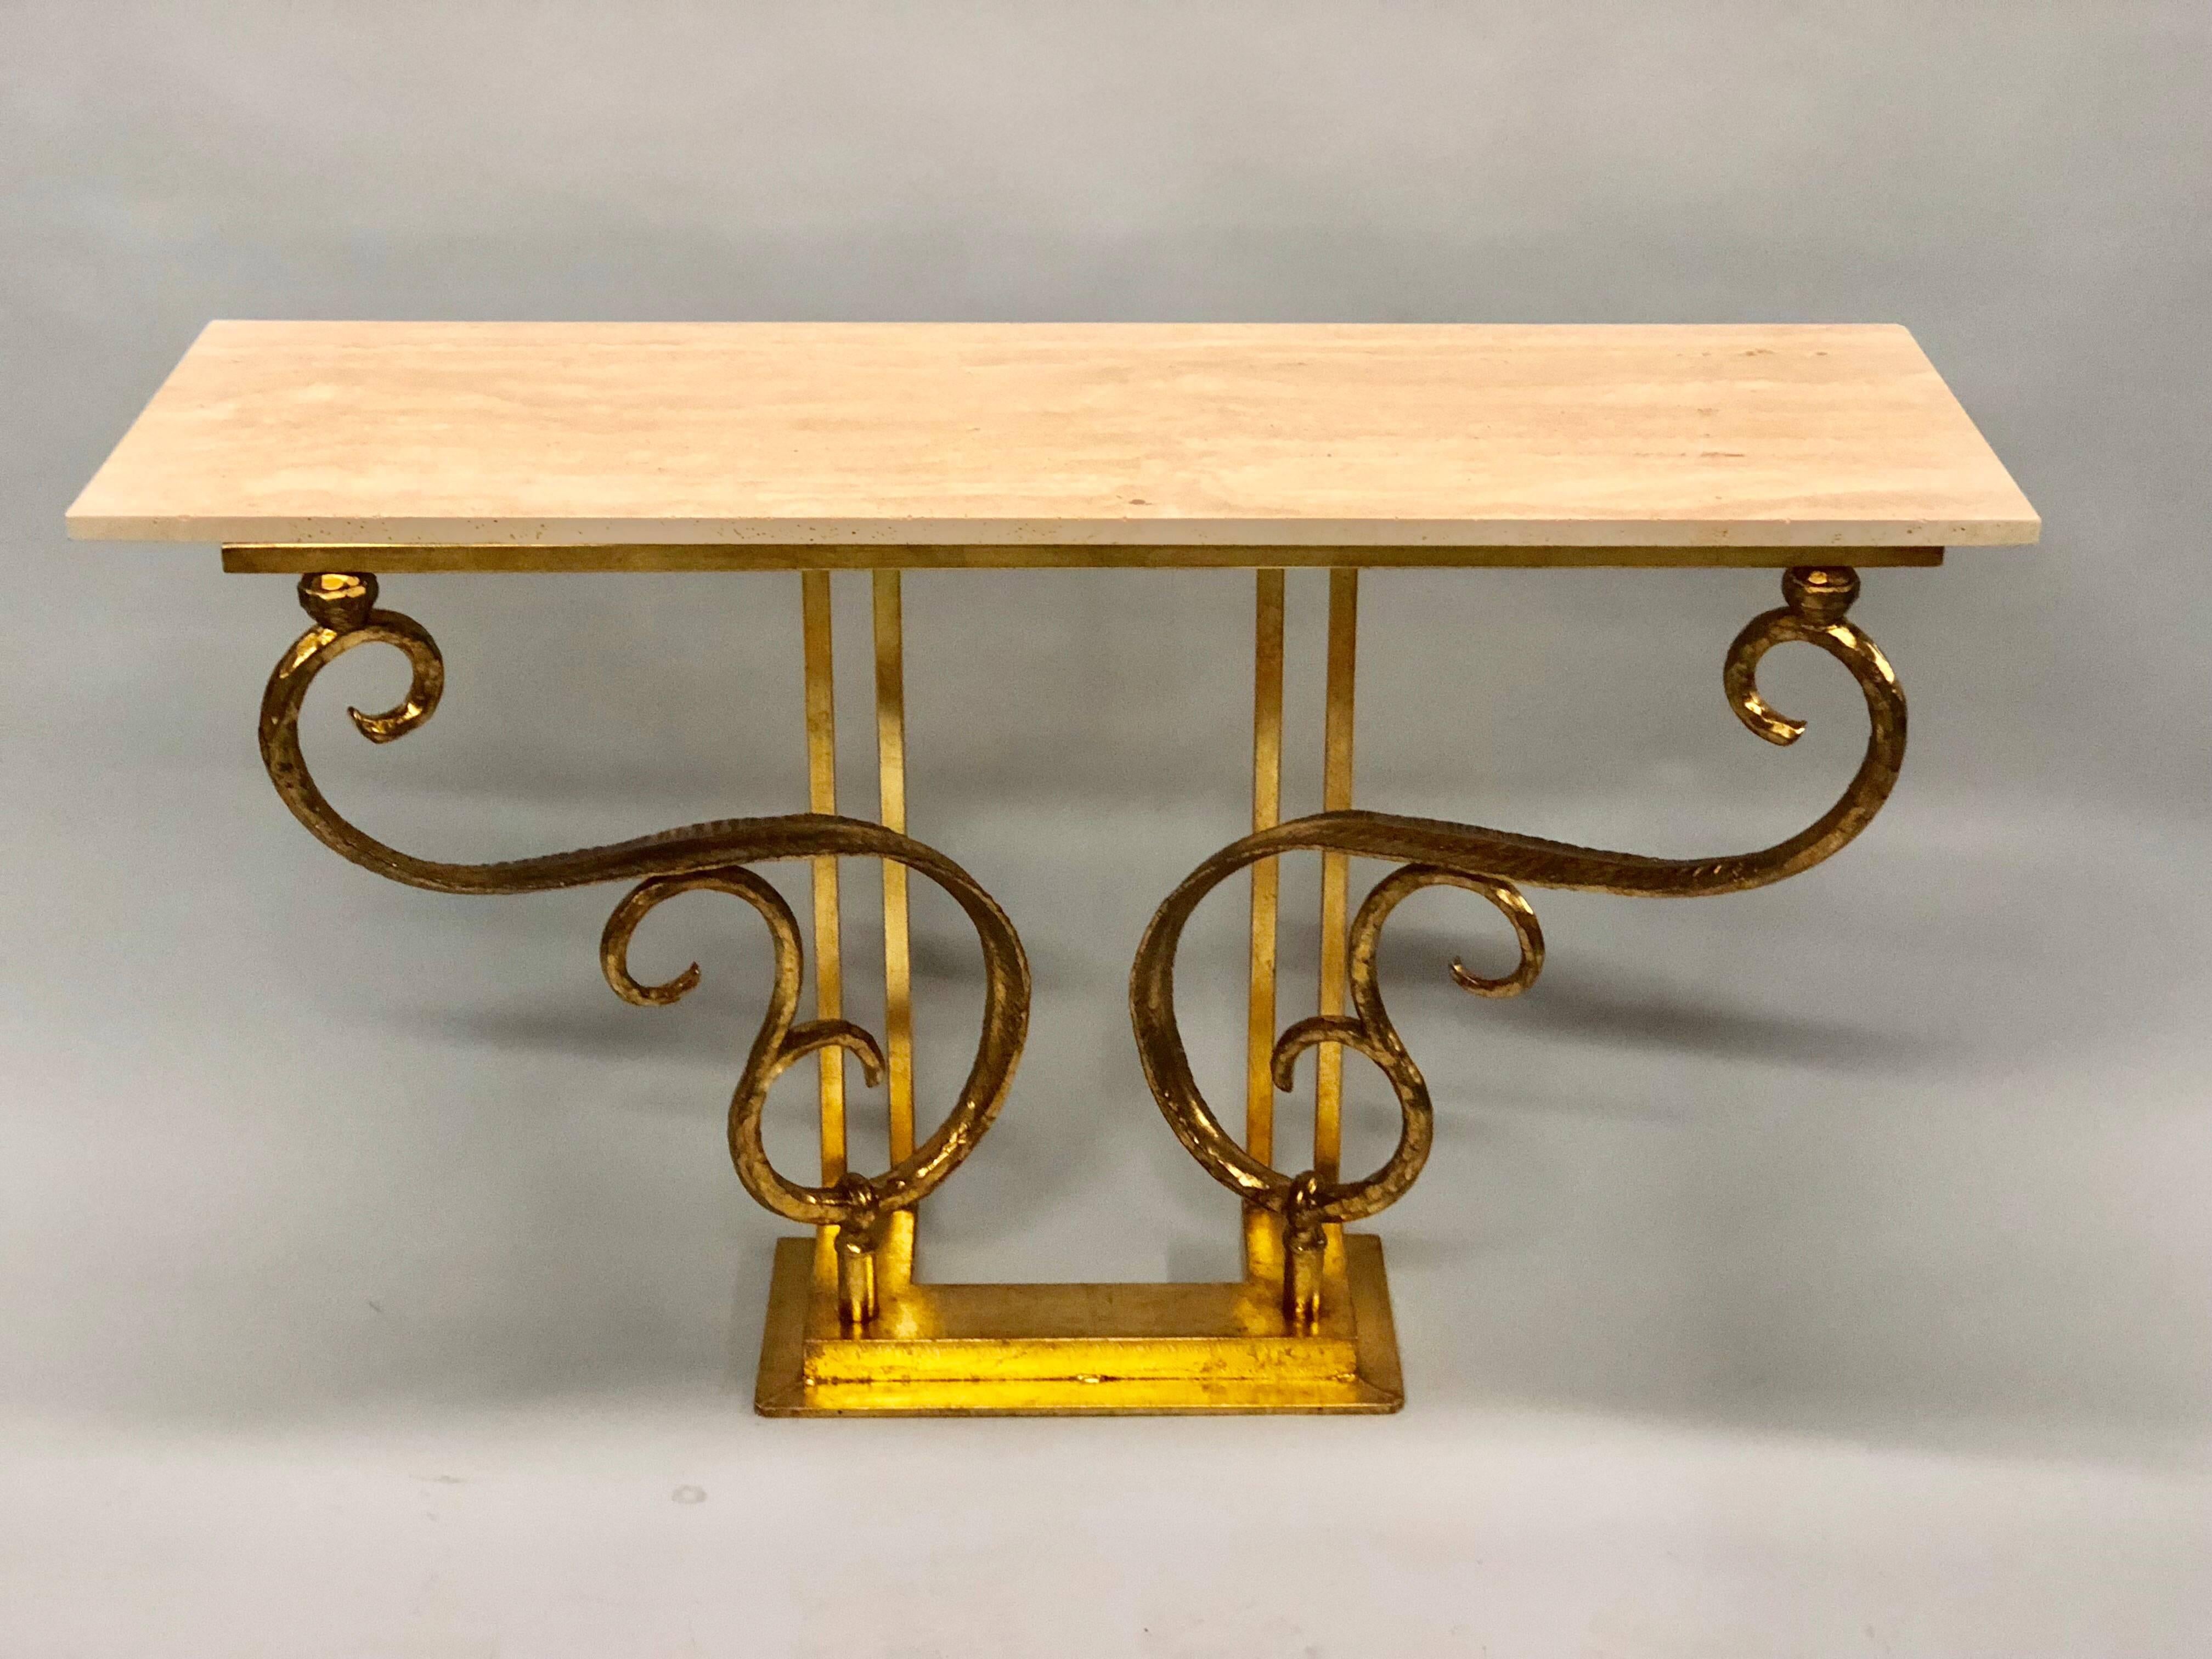 Two Italian Mid-Century Modern Gilt Iron Consoles/ Sofa Tables by Giovanni Banci In Excellent Condition For Sale In New York, NY